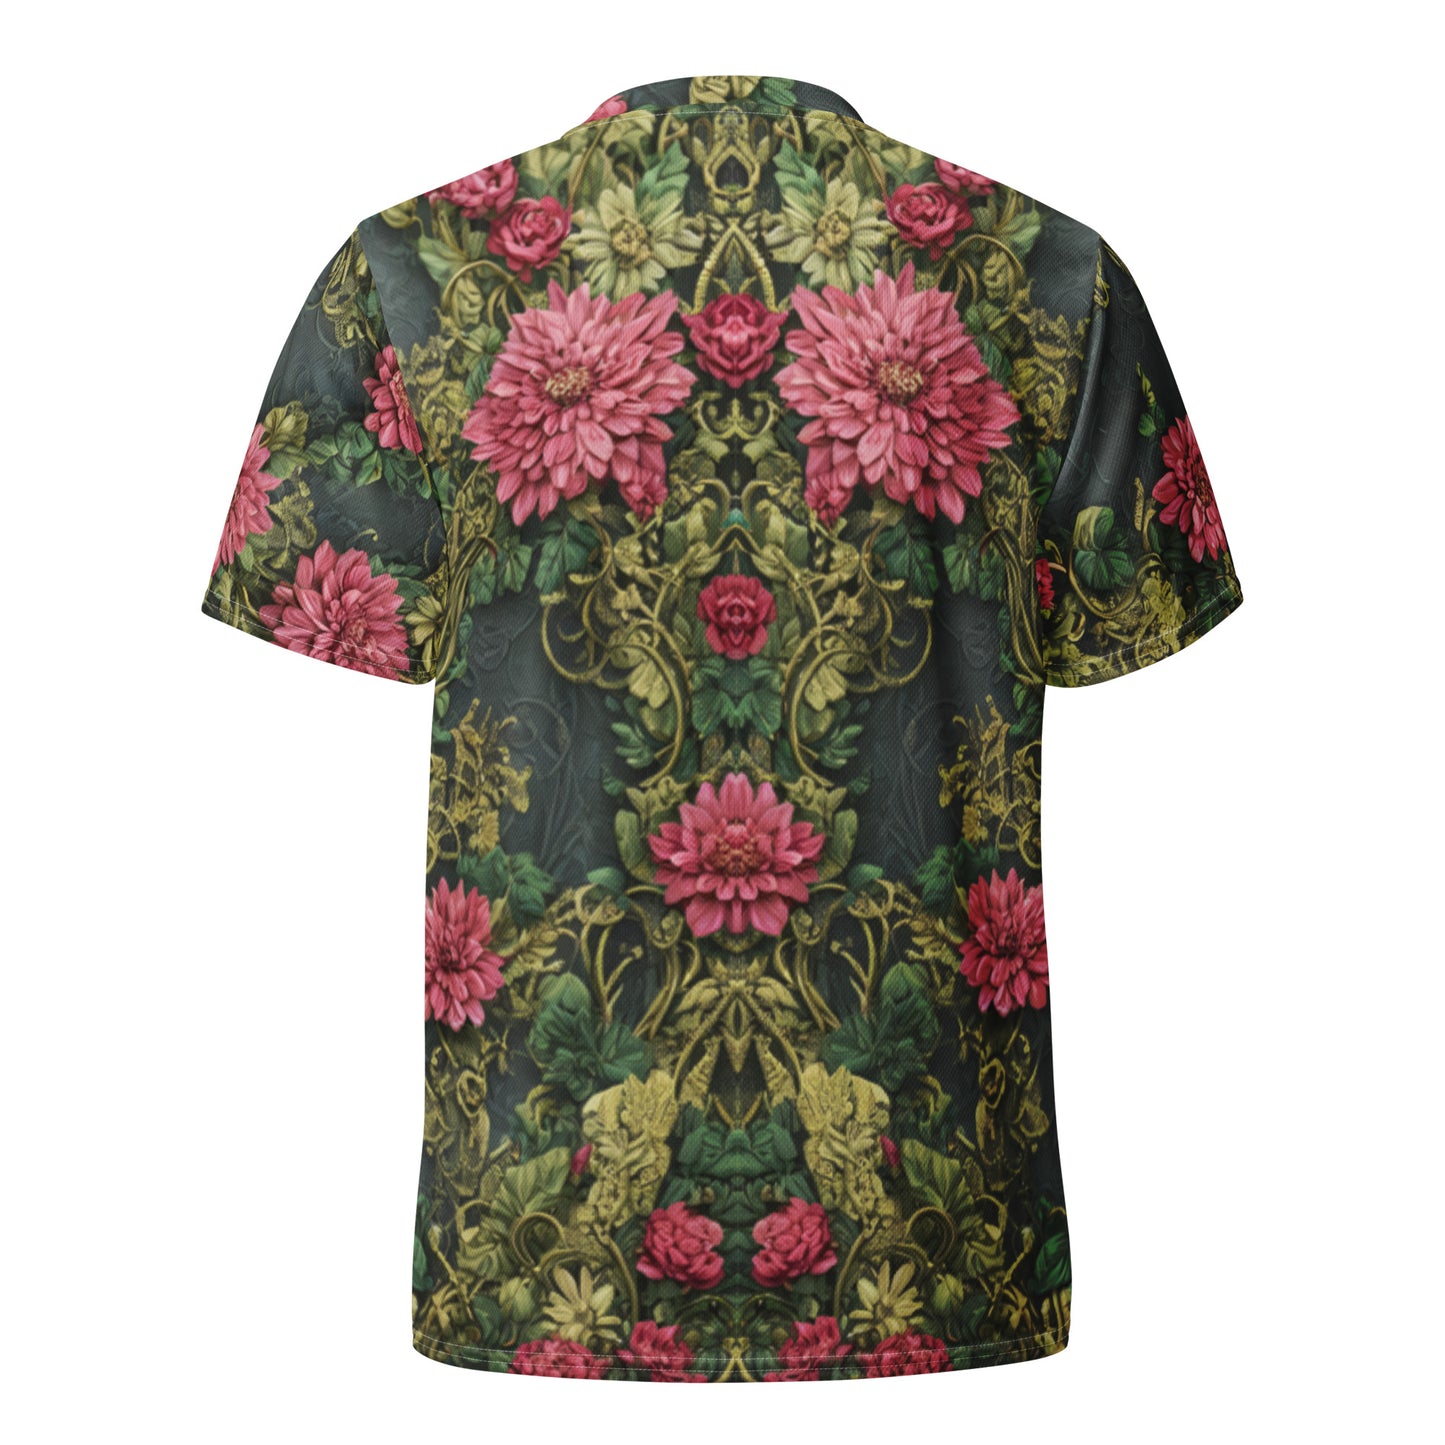 Vintage Floral Recycled unisex sports jersey